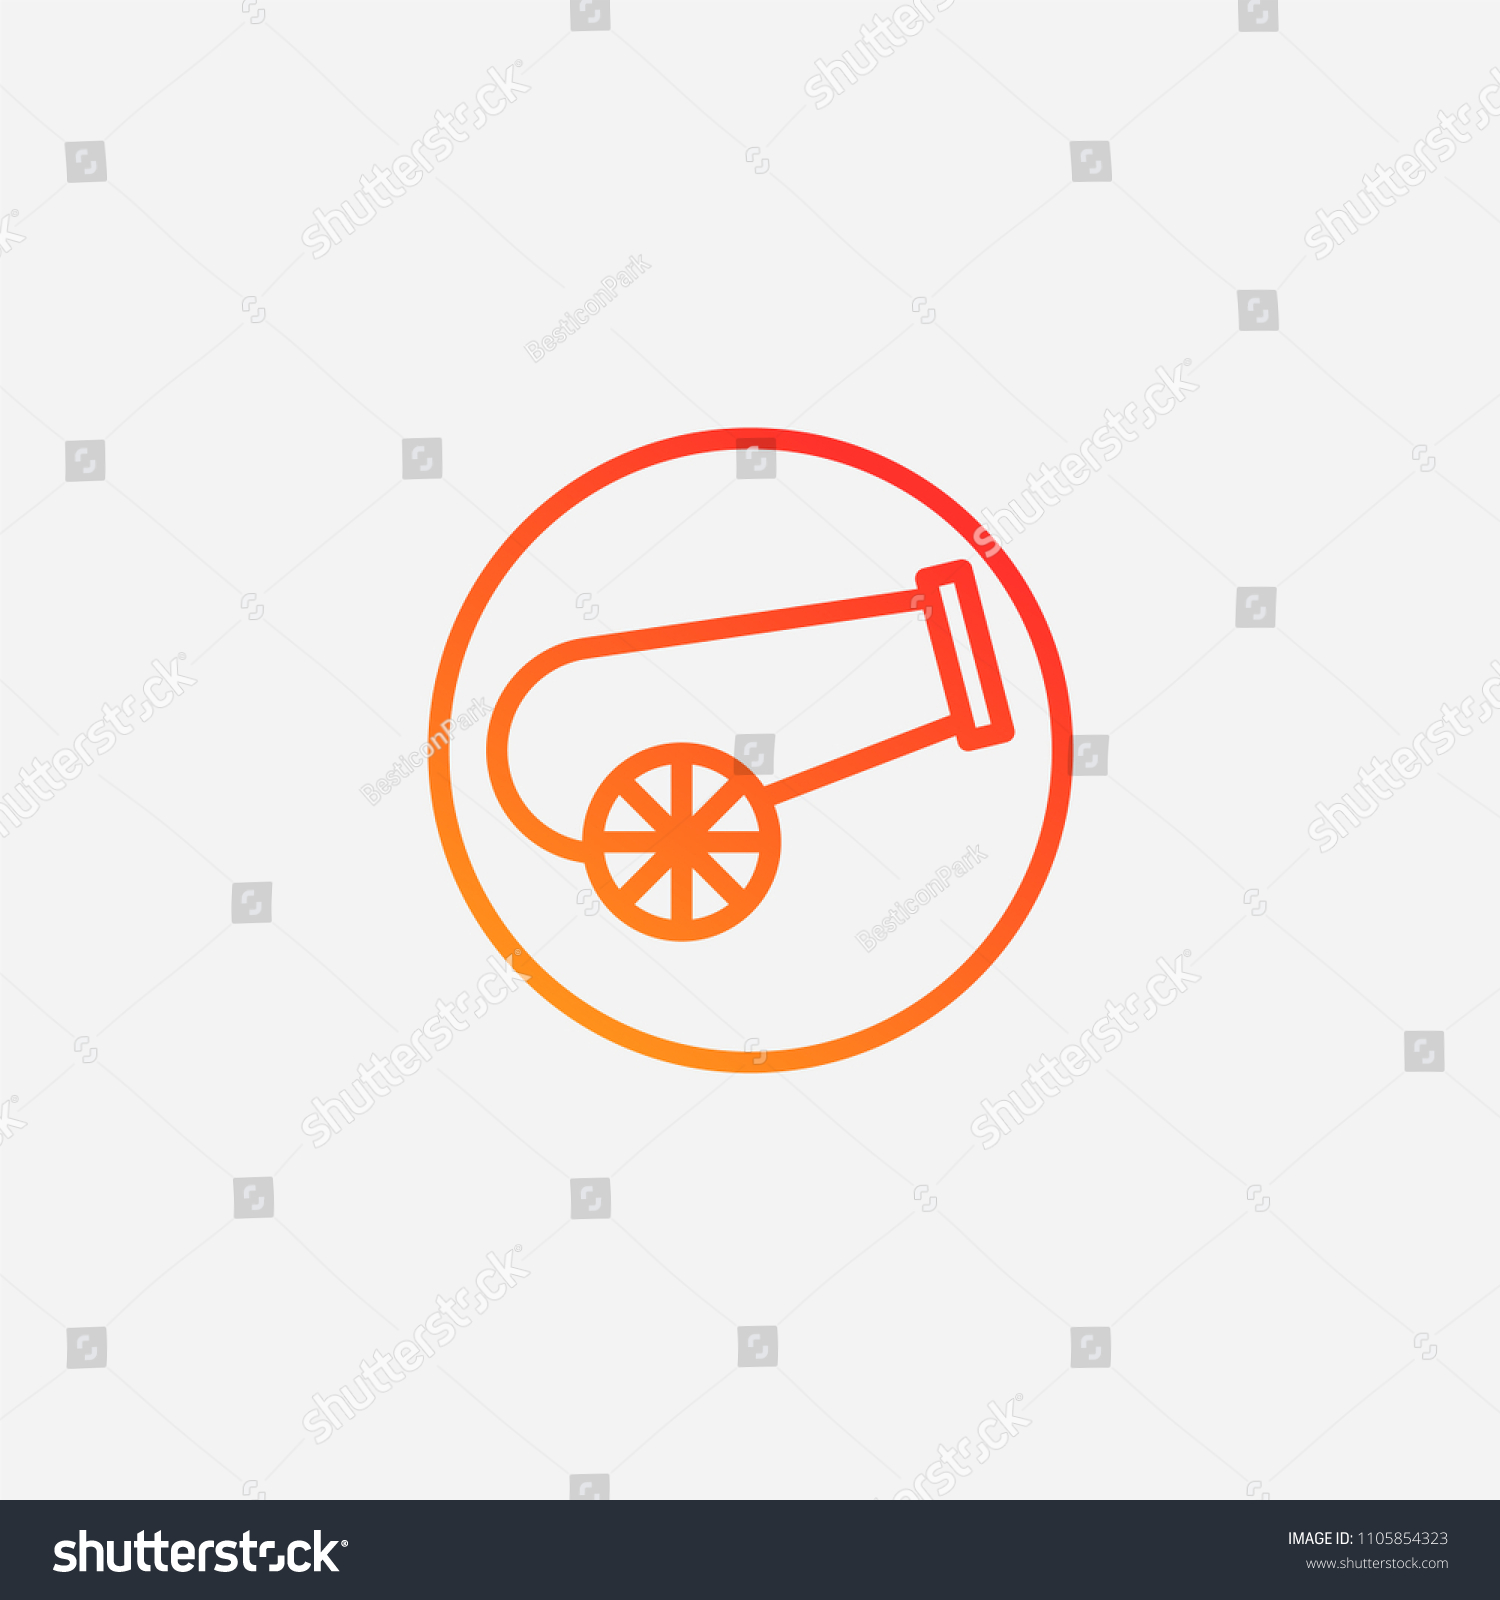 Outline Cannon Icongradient Illustrationvector Antique Sign Stock ...